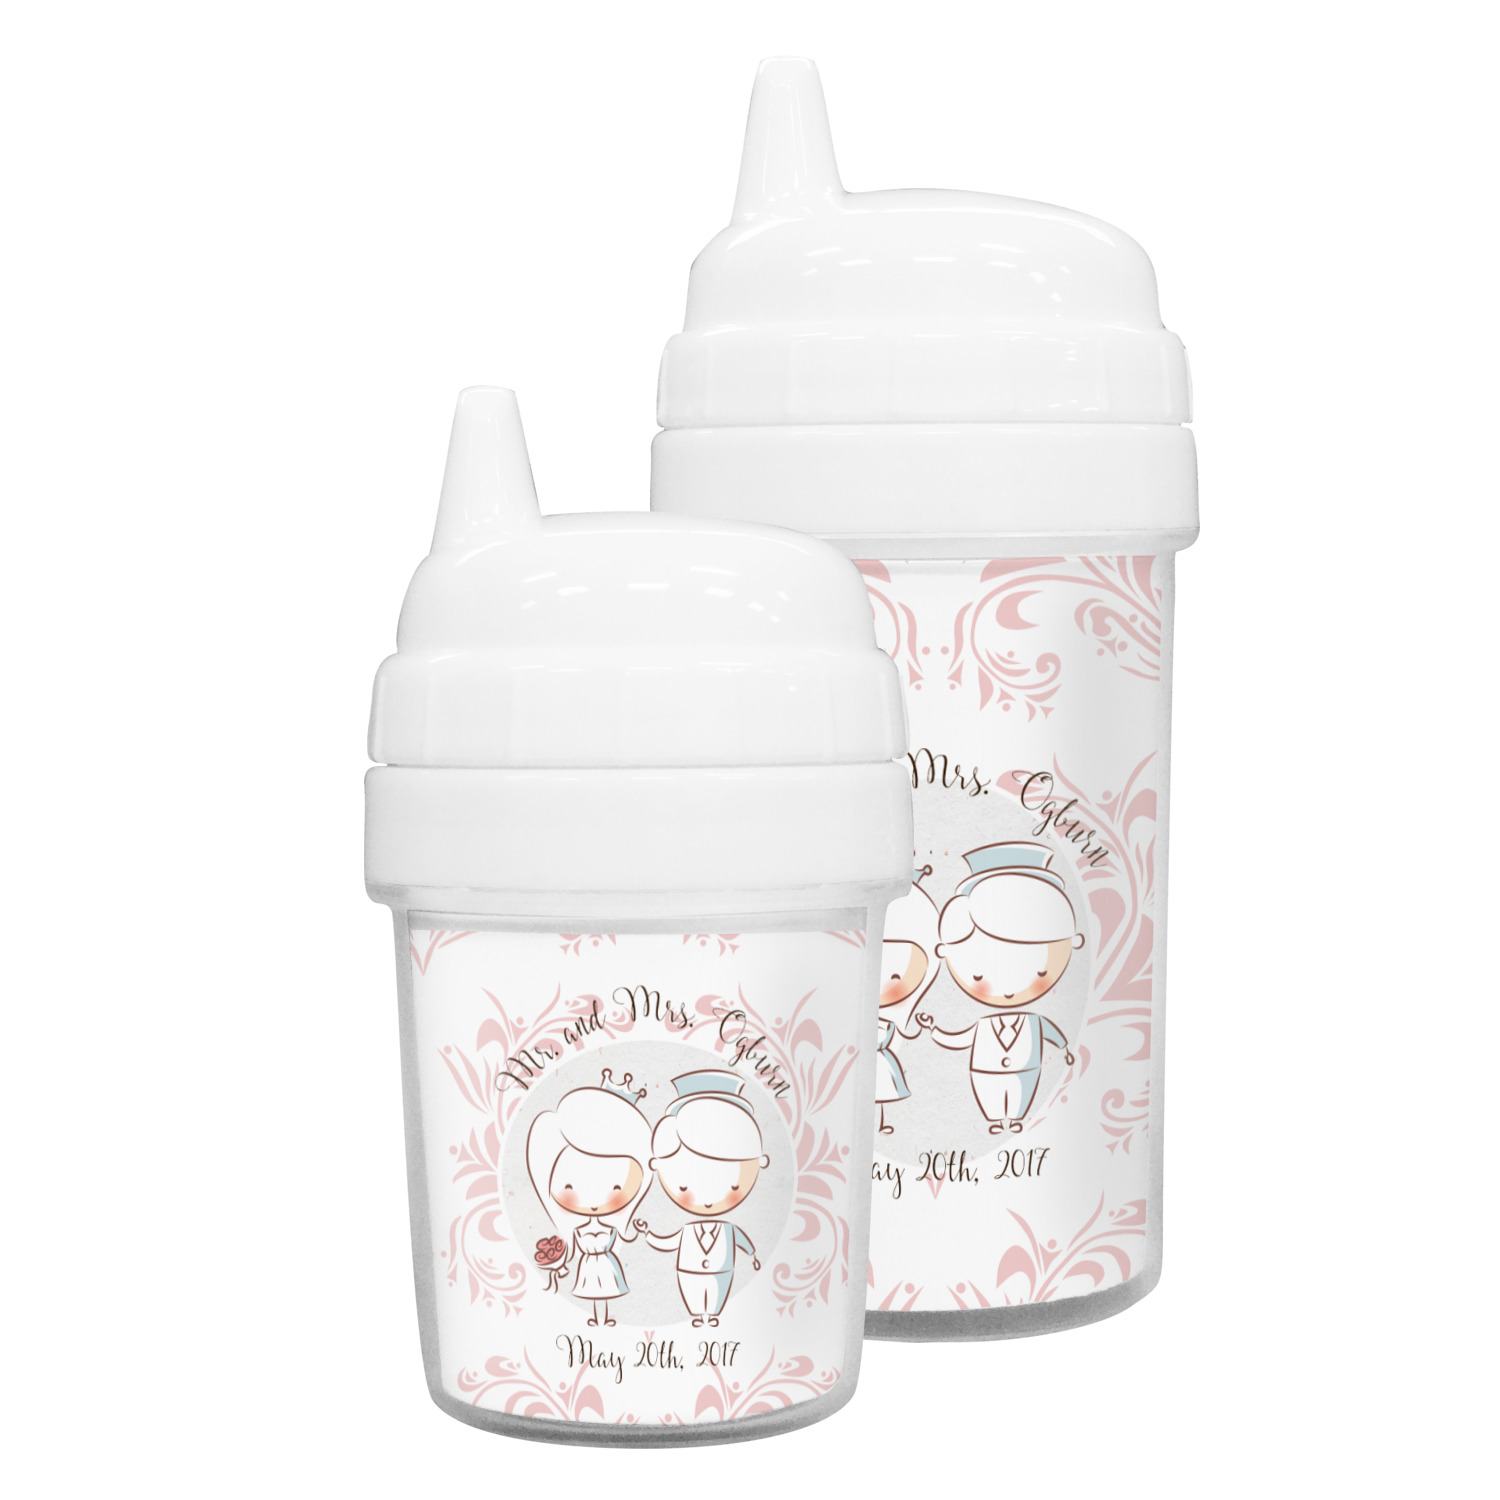 https://www.youcustomizeit.com/common/MAKE/1069381/Wedding-People-Sippy-Cups.jpg?lm=1604101946